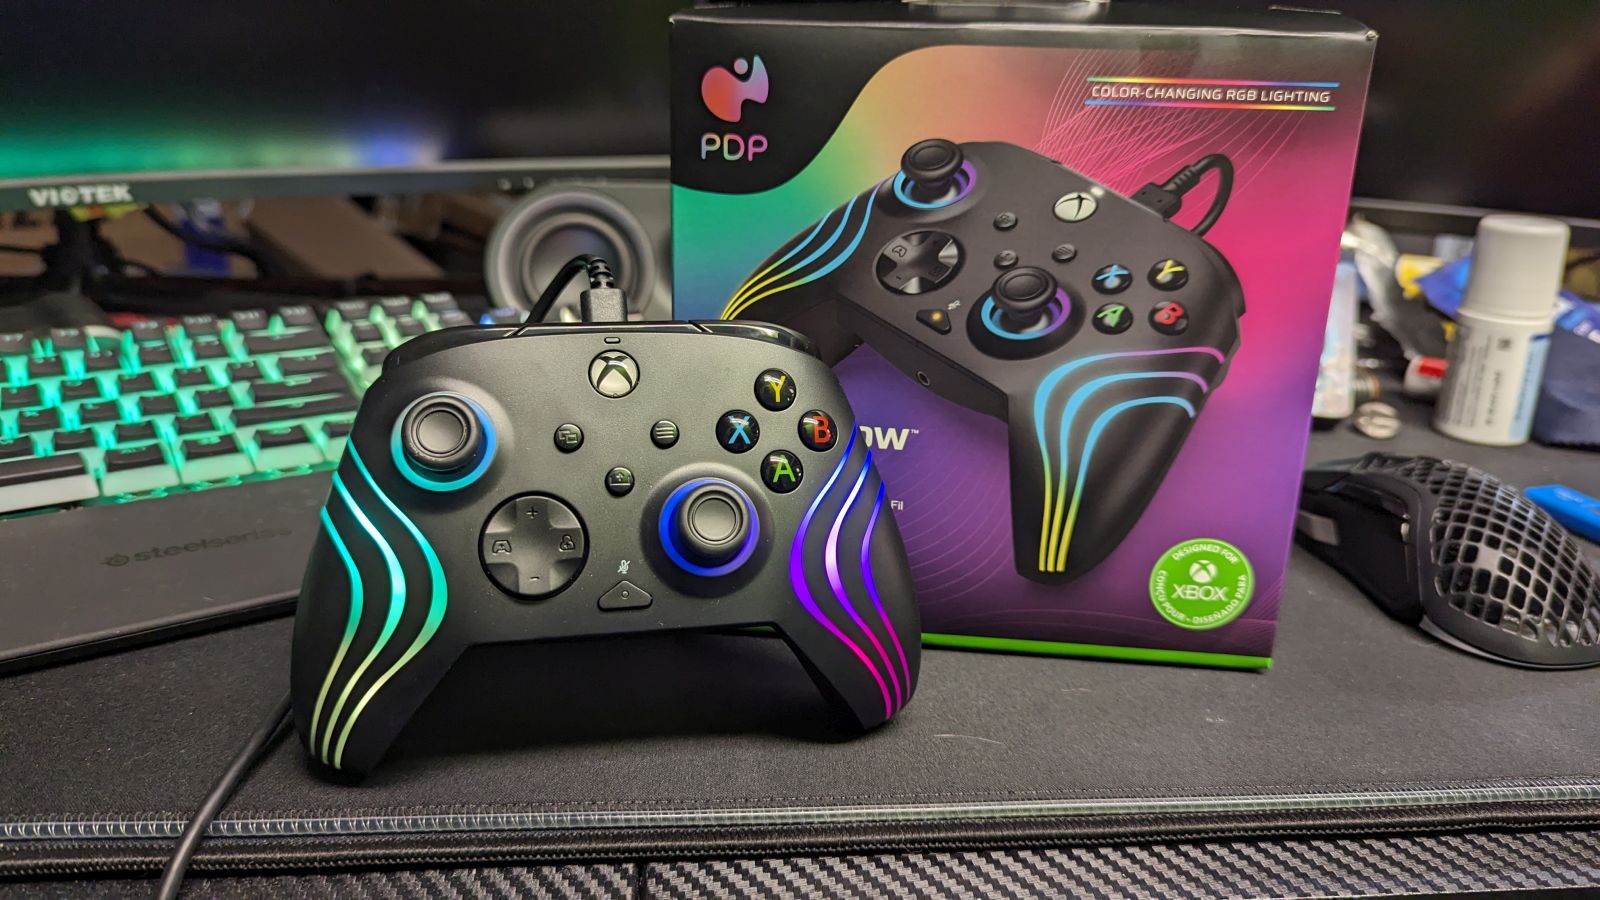 Get this Xbox wired controller with customizable RGB lighting for